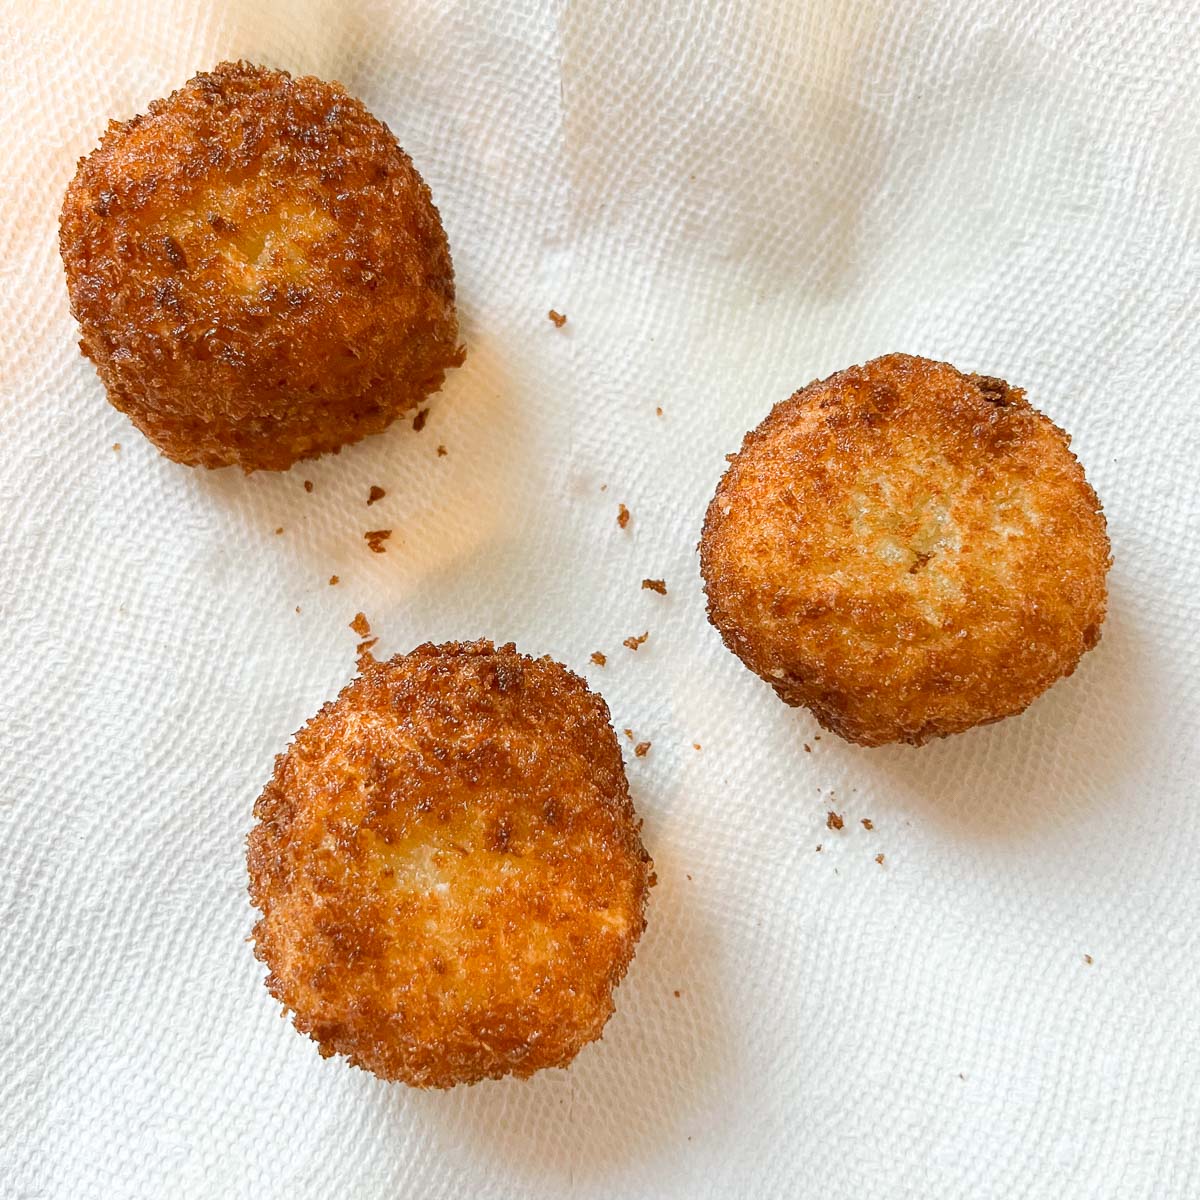 potato cheese balls draining excess oil on paper towel